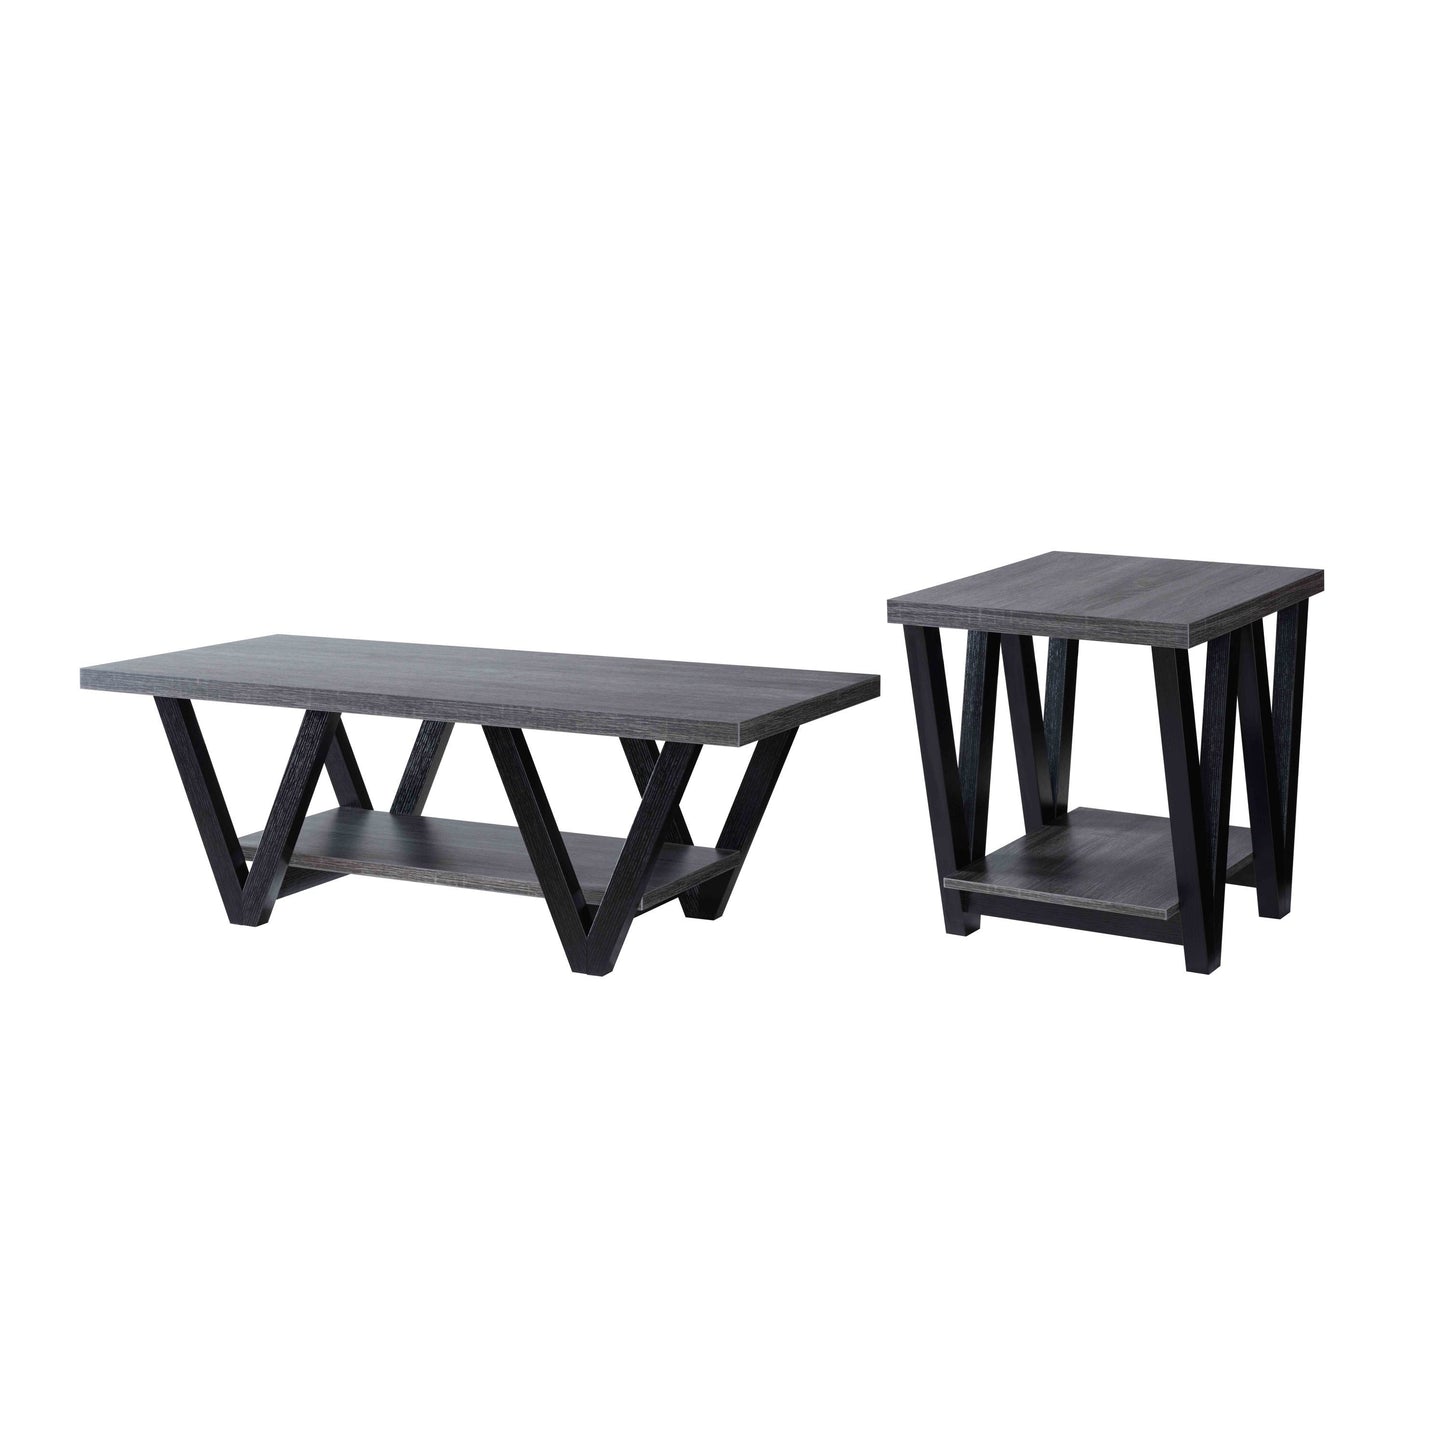 Distressed Grey & Black Coffee and End Table Set with V-Shaped Legs